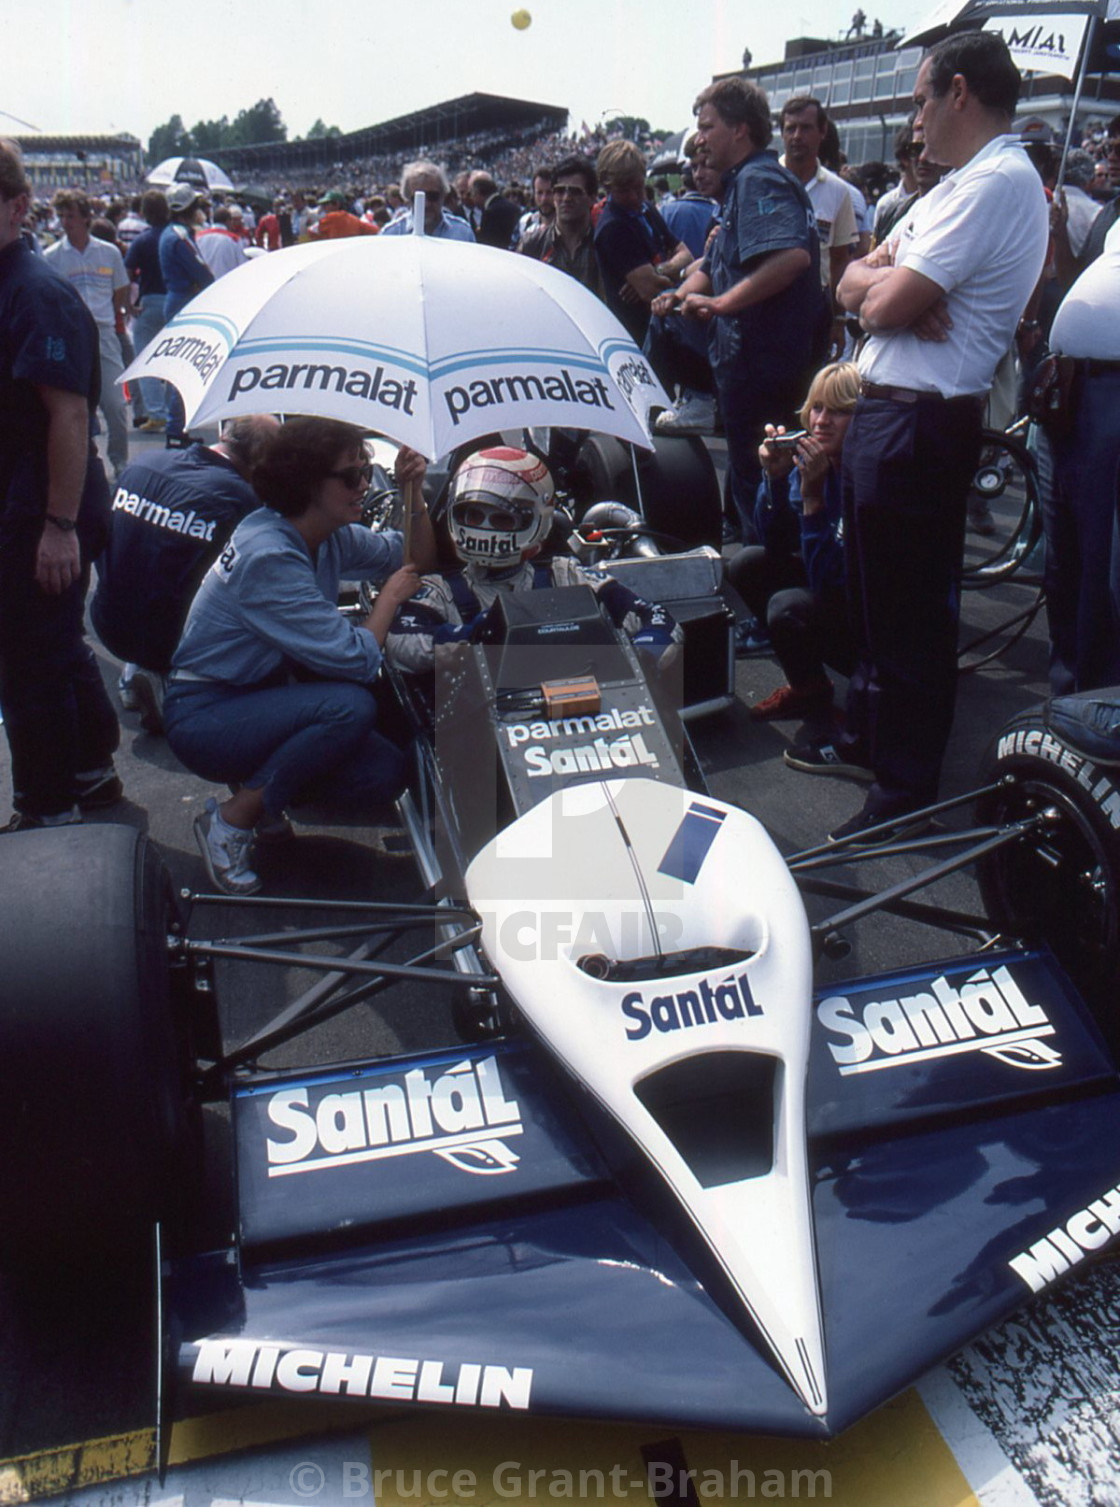 Nelson Piquet In His Parmalat Brabham At The 1984 John Player Special British Grand Prix License Download Or Print For 15 00 Photos Picfair